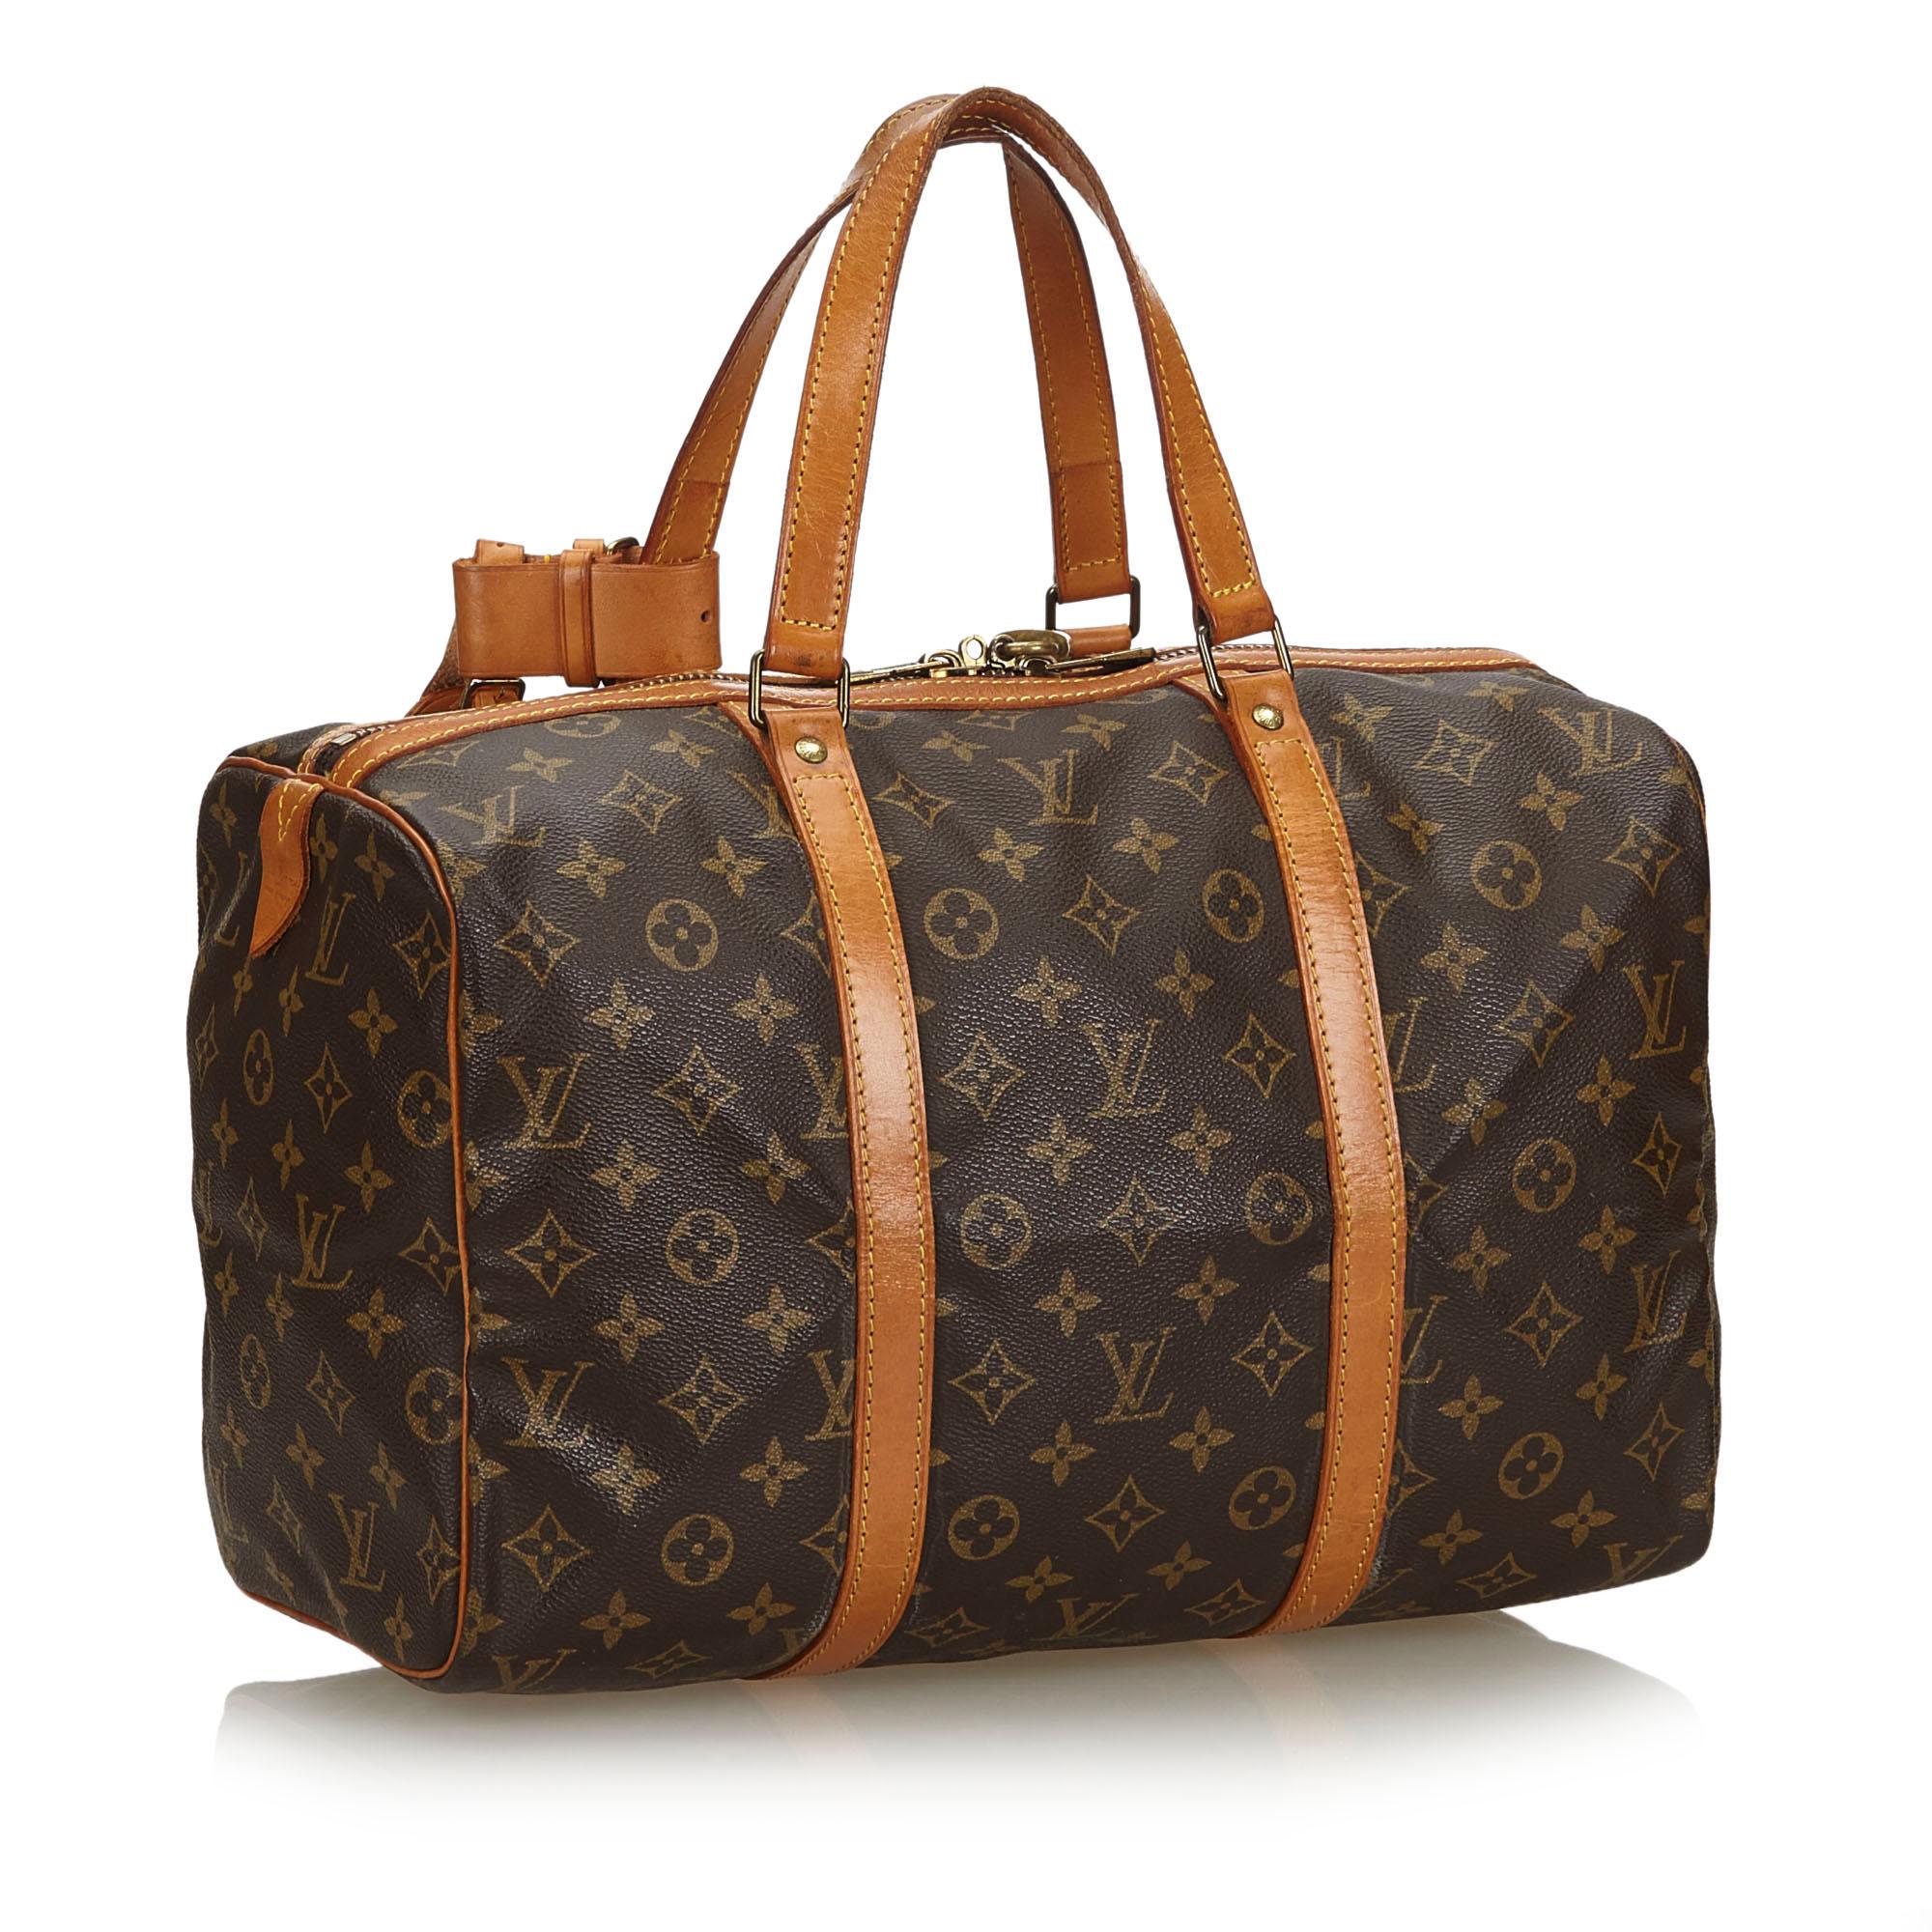 The Sac Souple 35 features a monogram canvas body, flat leather straps, and a top zip closure. It carries as B condition rating.

Inclusions: 
Padlock

Louis Vuitton pieces do not come with an authenticity card please refer to the production date